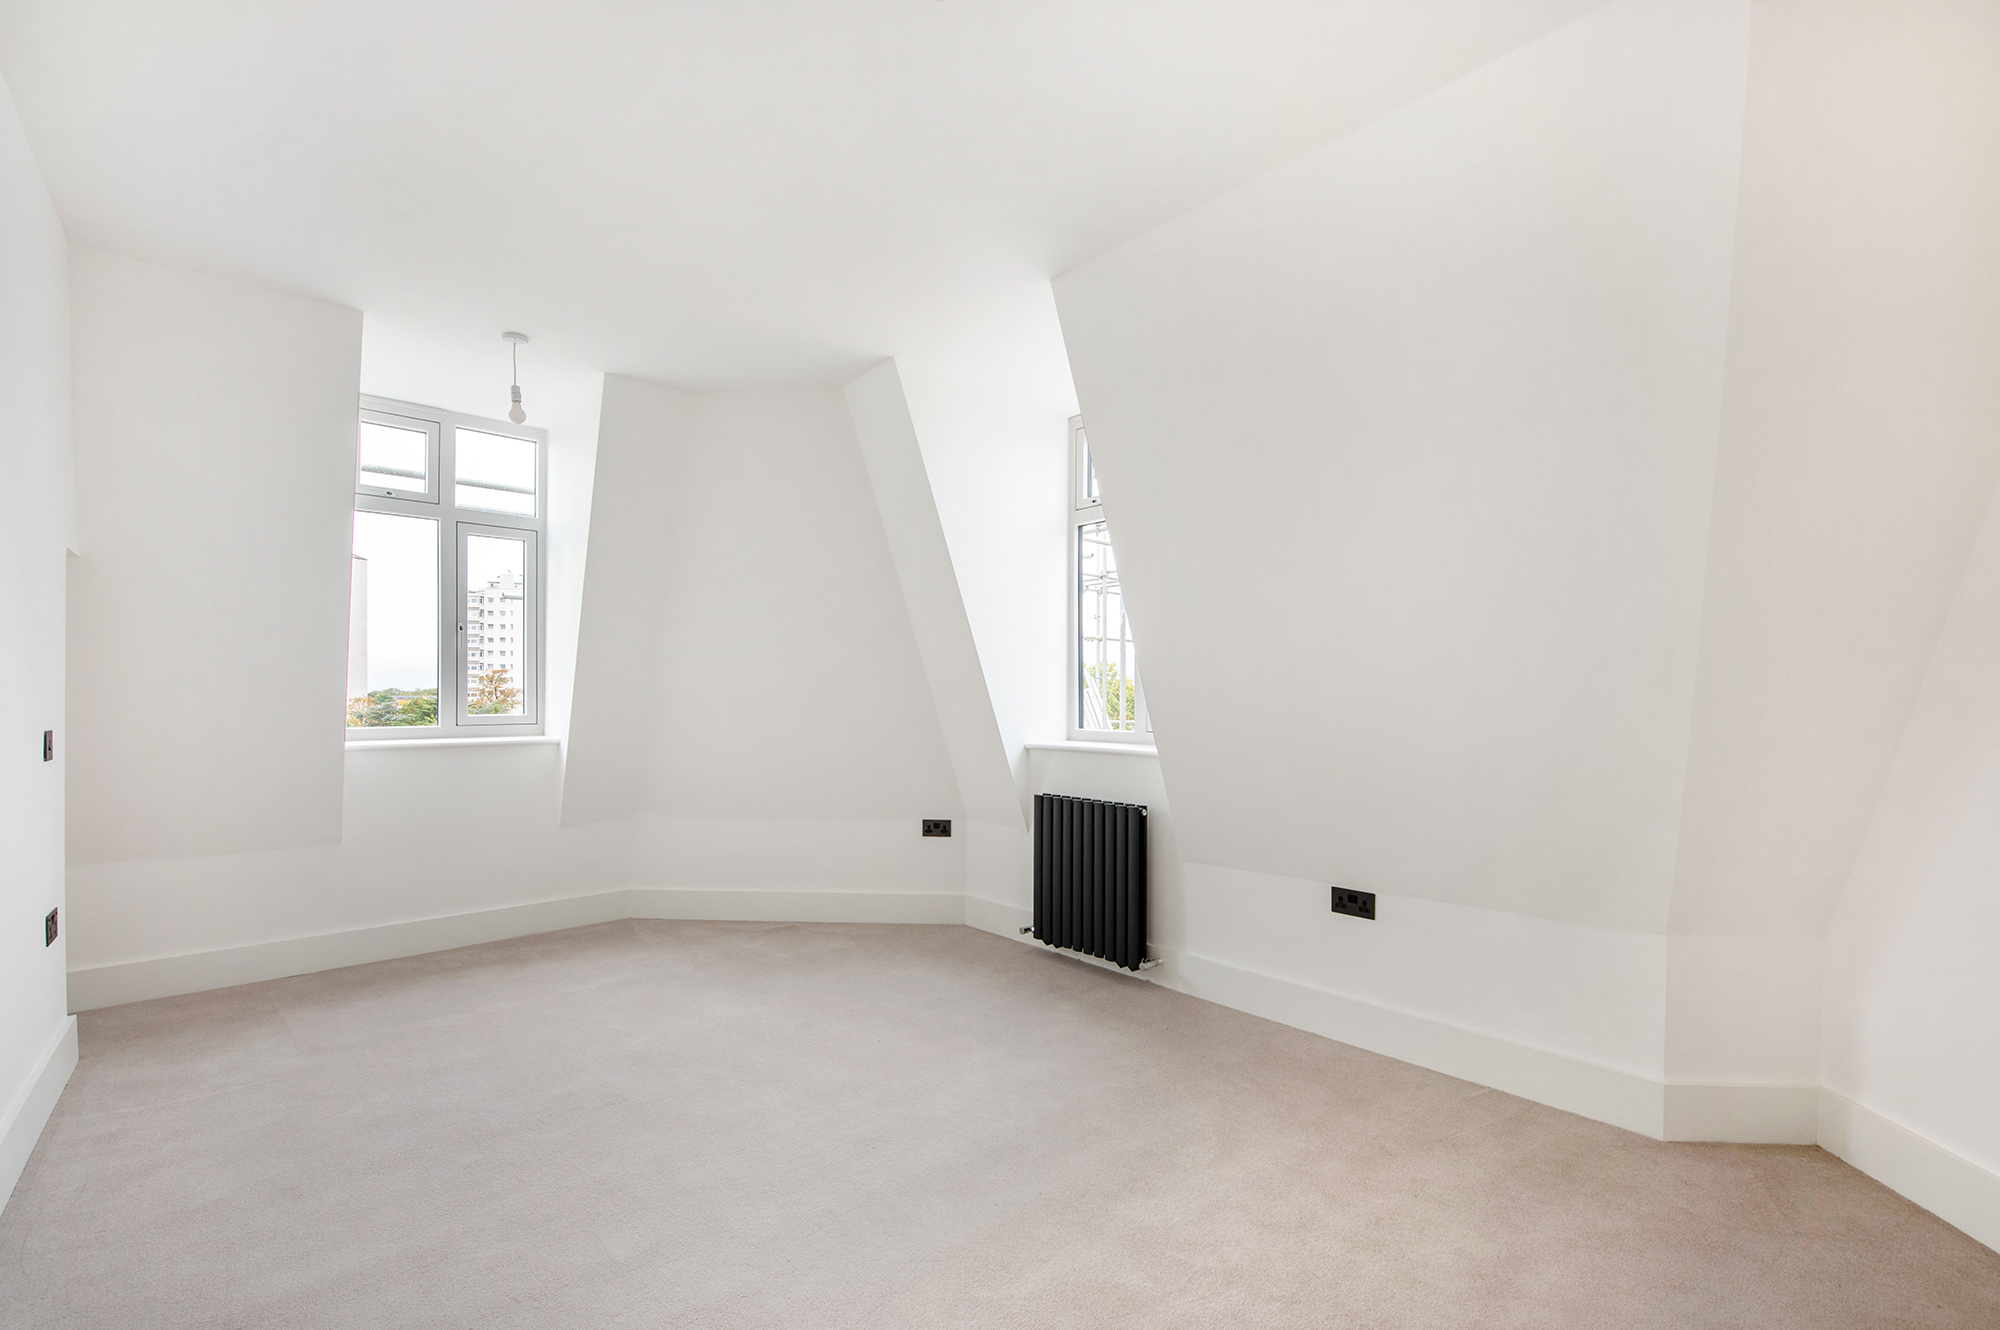 Bedroom space in Robins Court flats